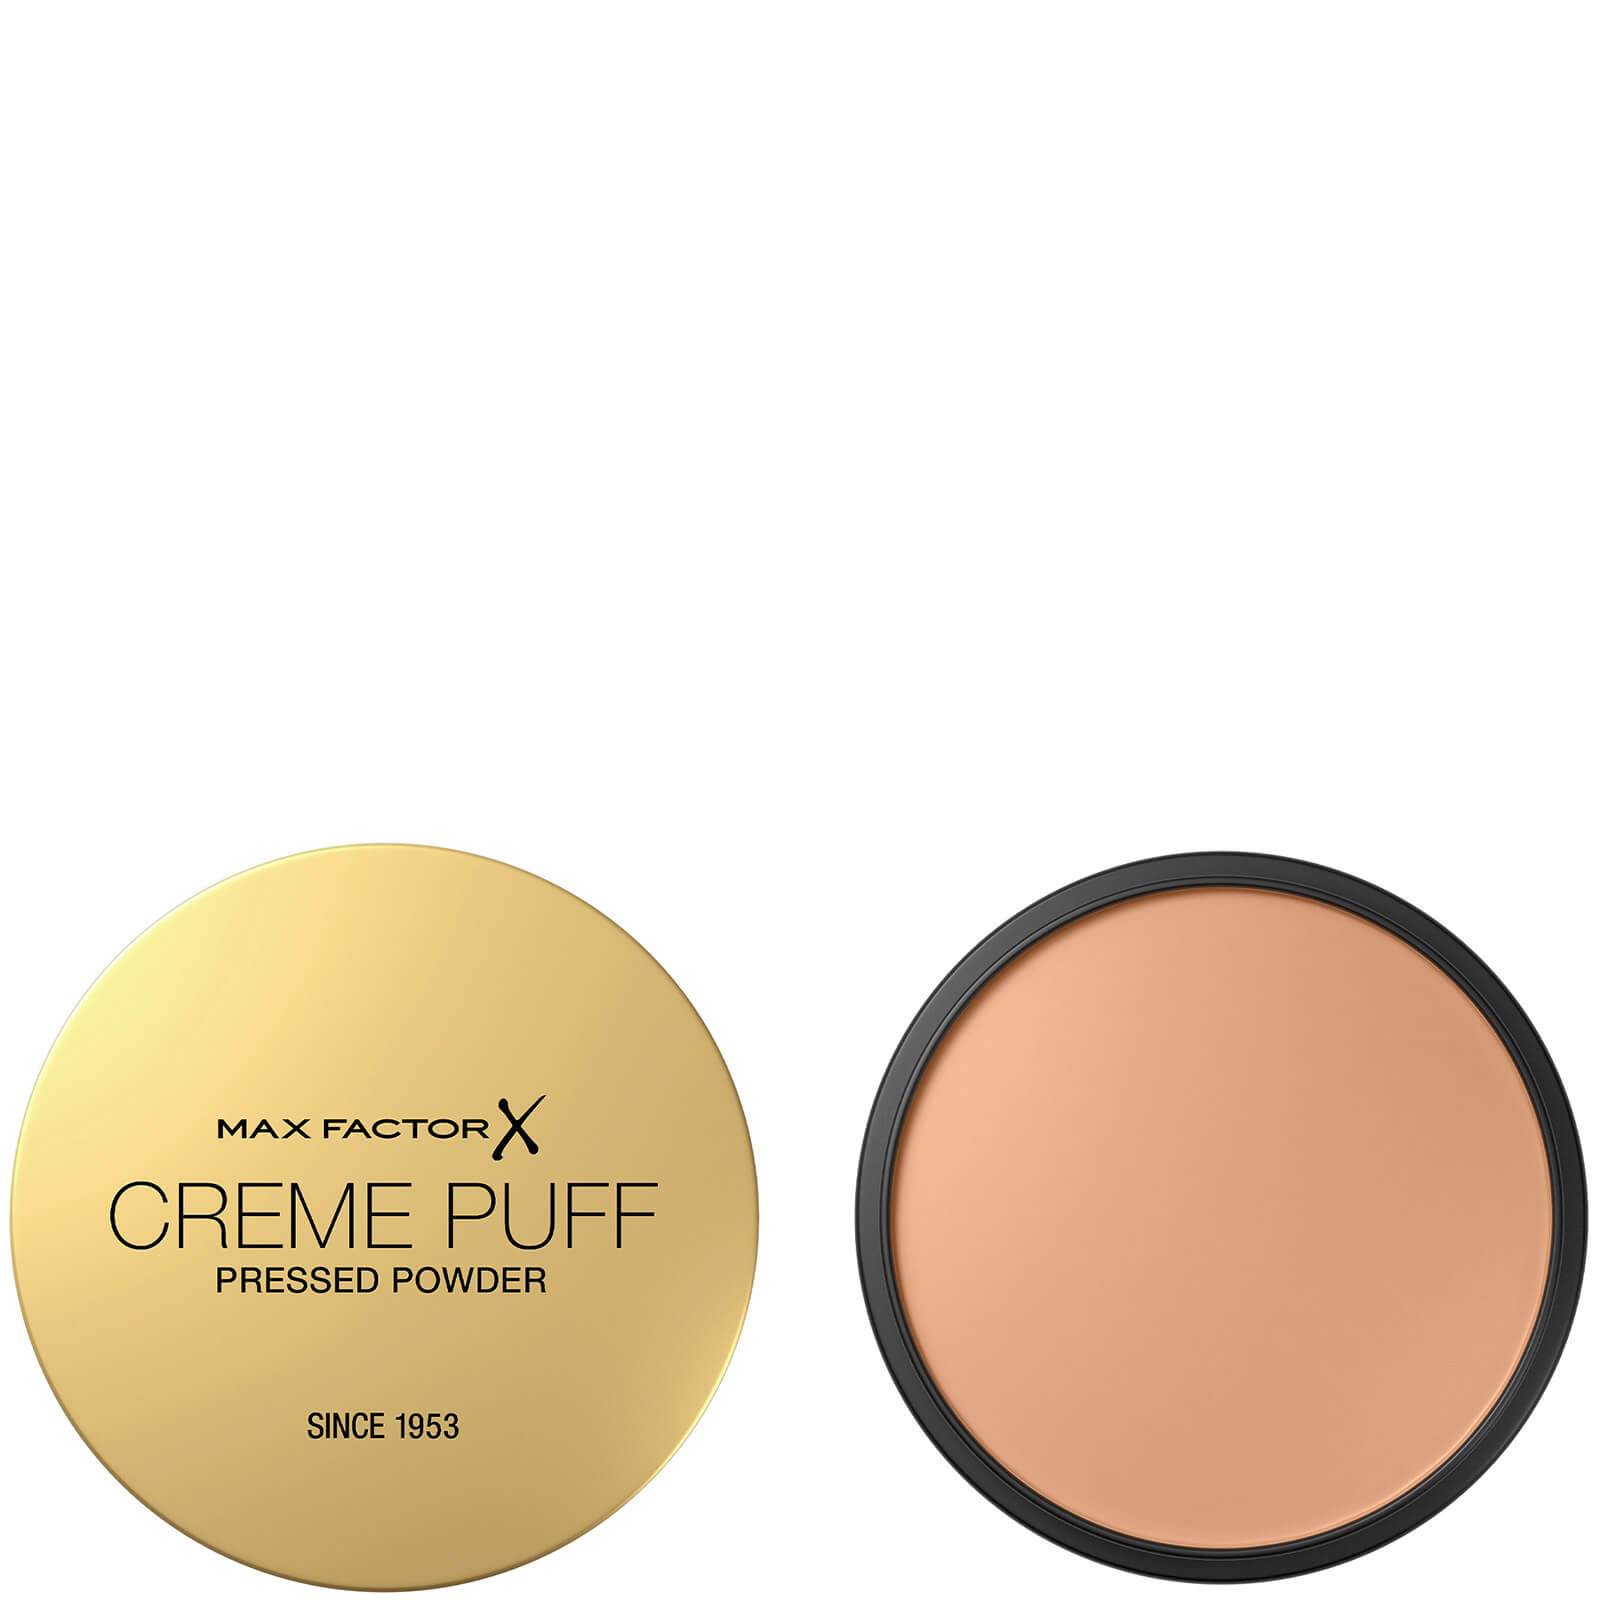 Max Factor Creme Puff Pressed Powder 21g (Various Shades) - Candle Glow